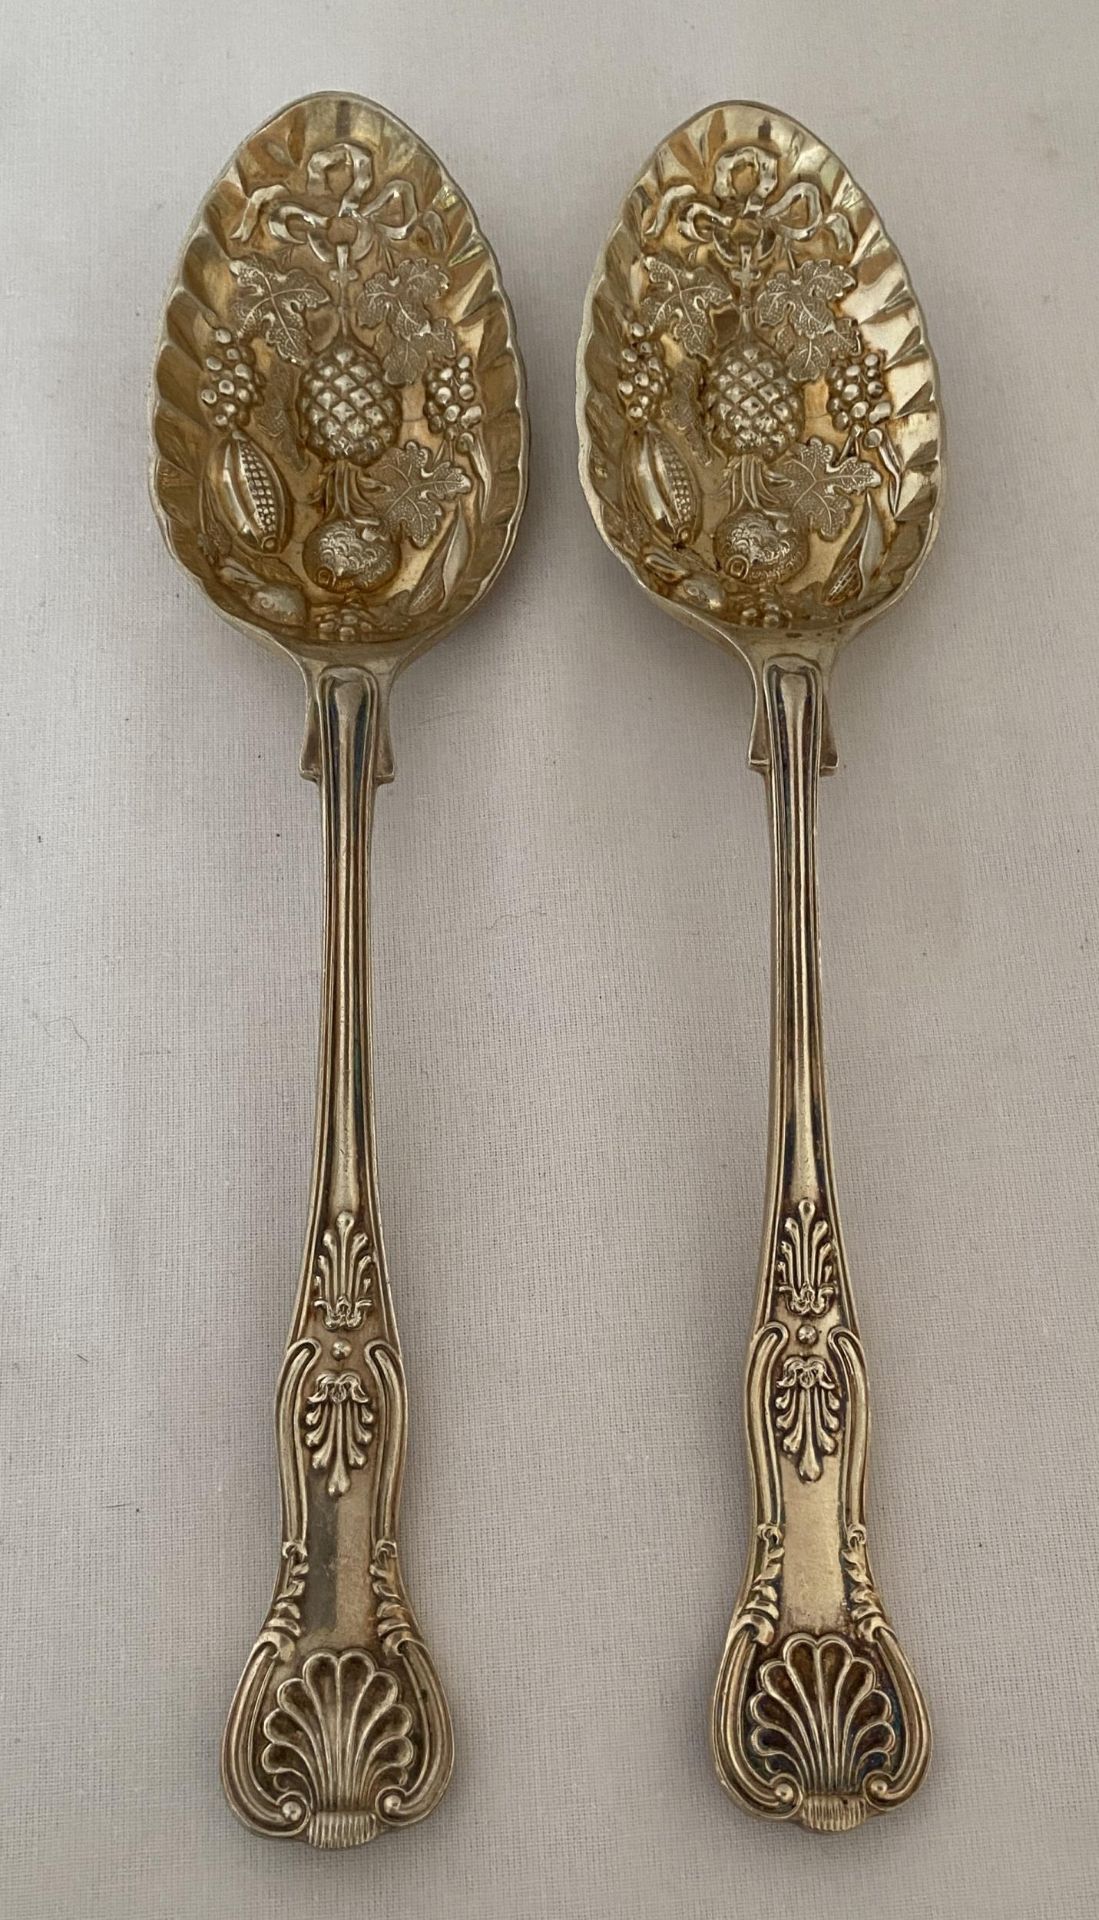 A PAIR OF ELIZABETH II 1972 HALLMARKED SHEFFIELD SILVER BERRY SPOONS, MAKER COOPER BROTHERS & SONS - Image 3 of 12